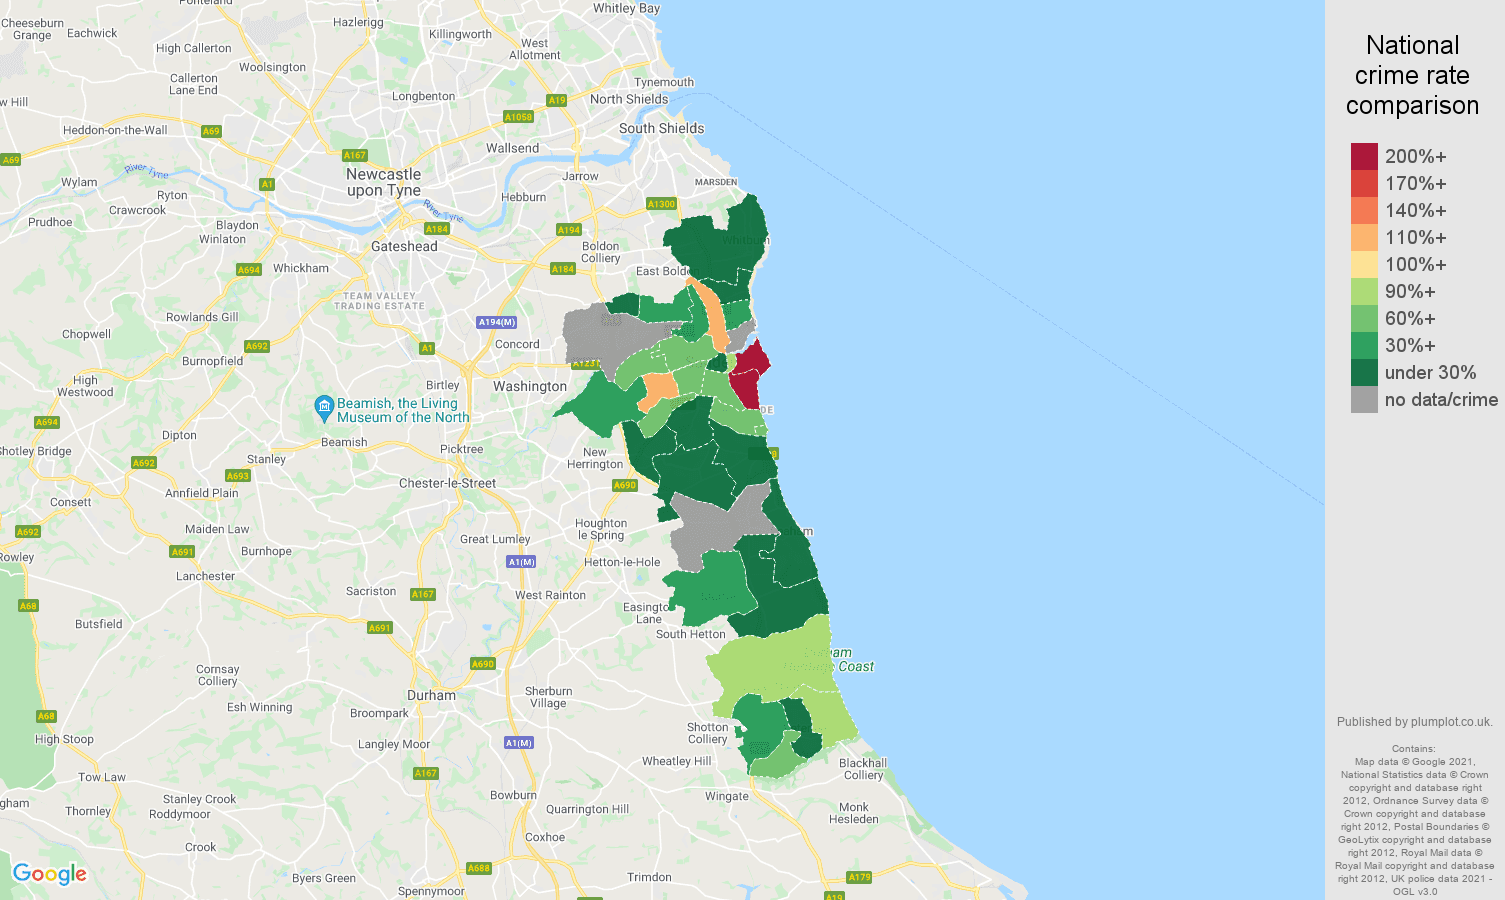 Sunderland robbery crime rate comparison map